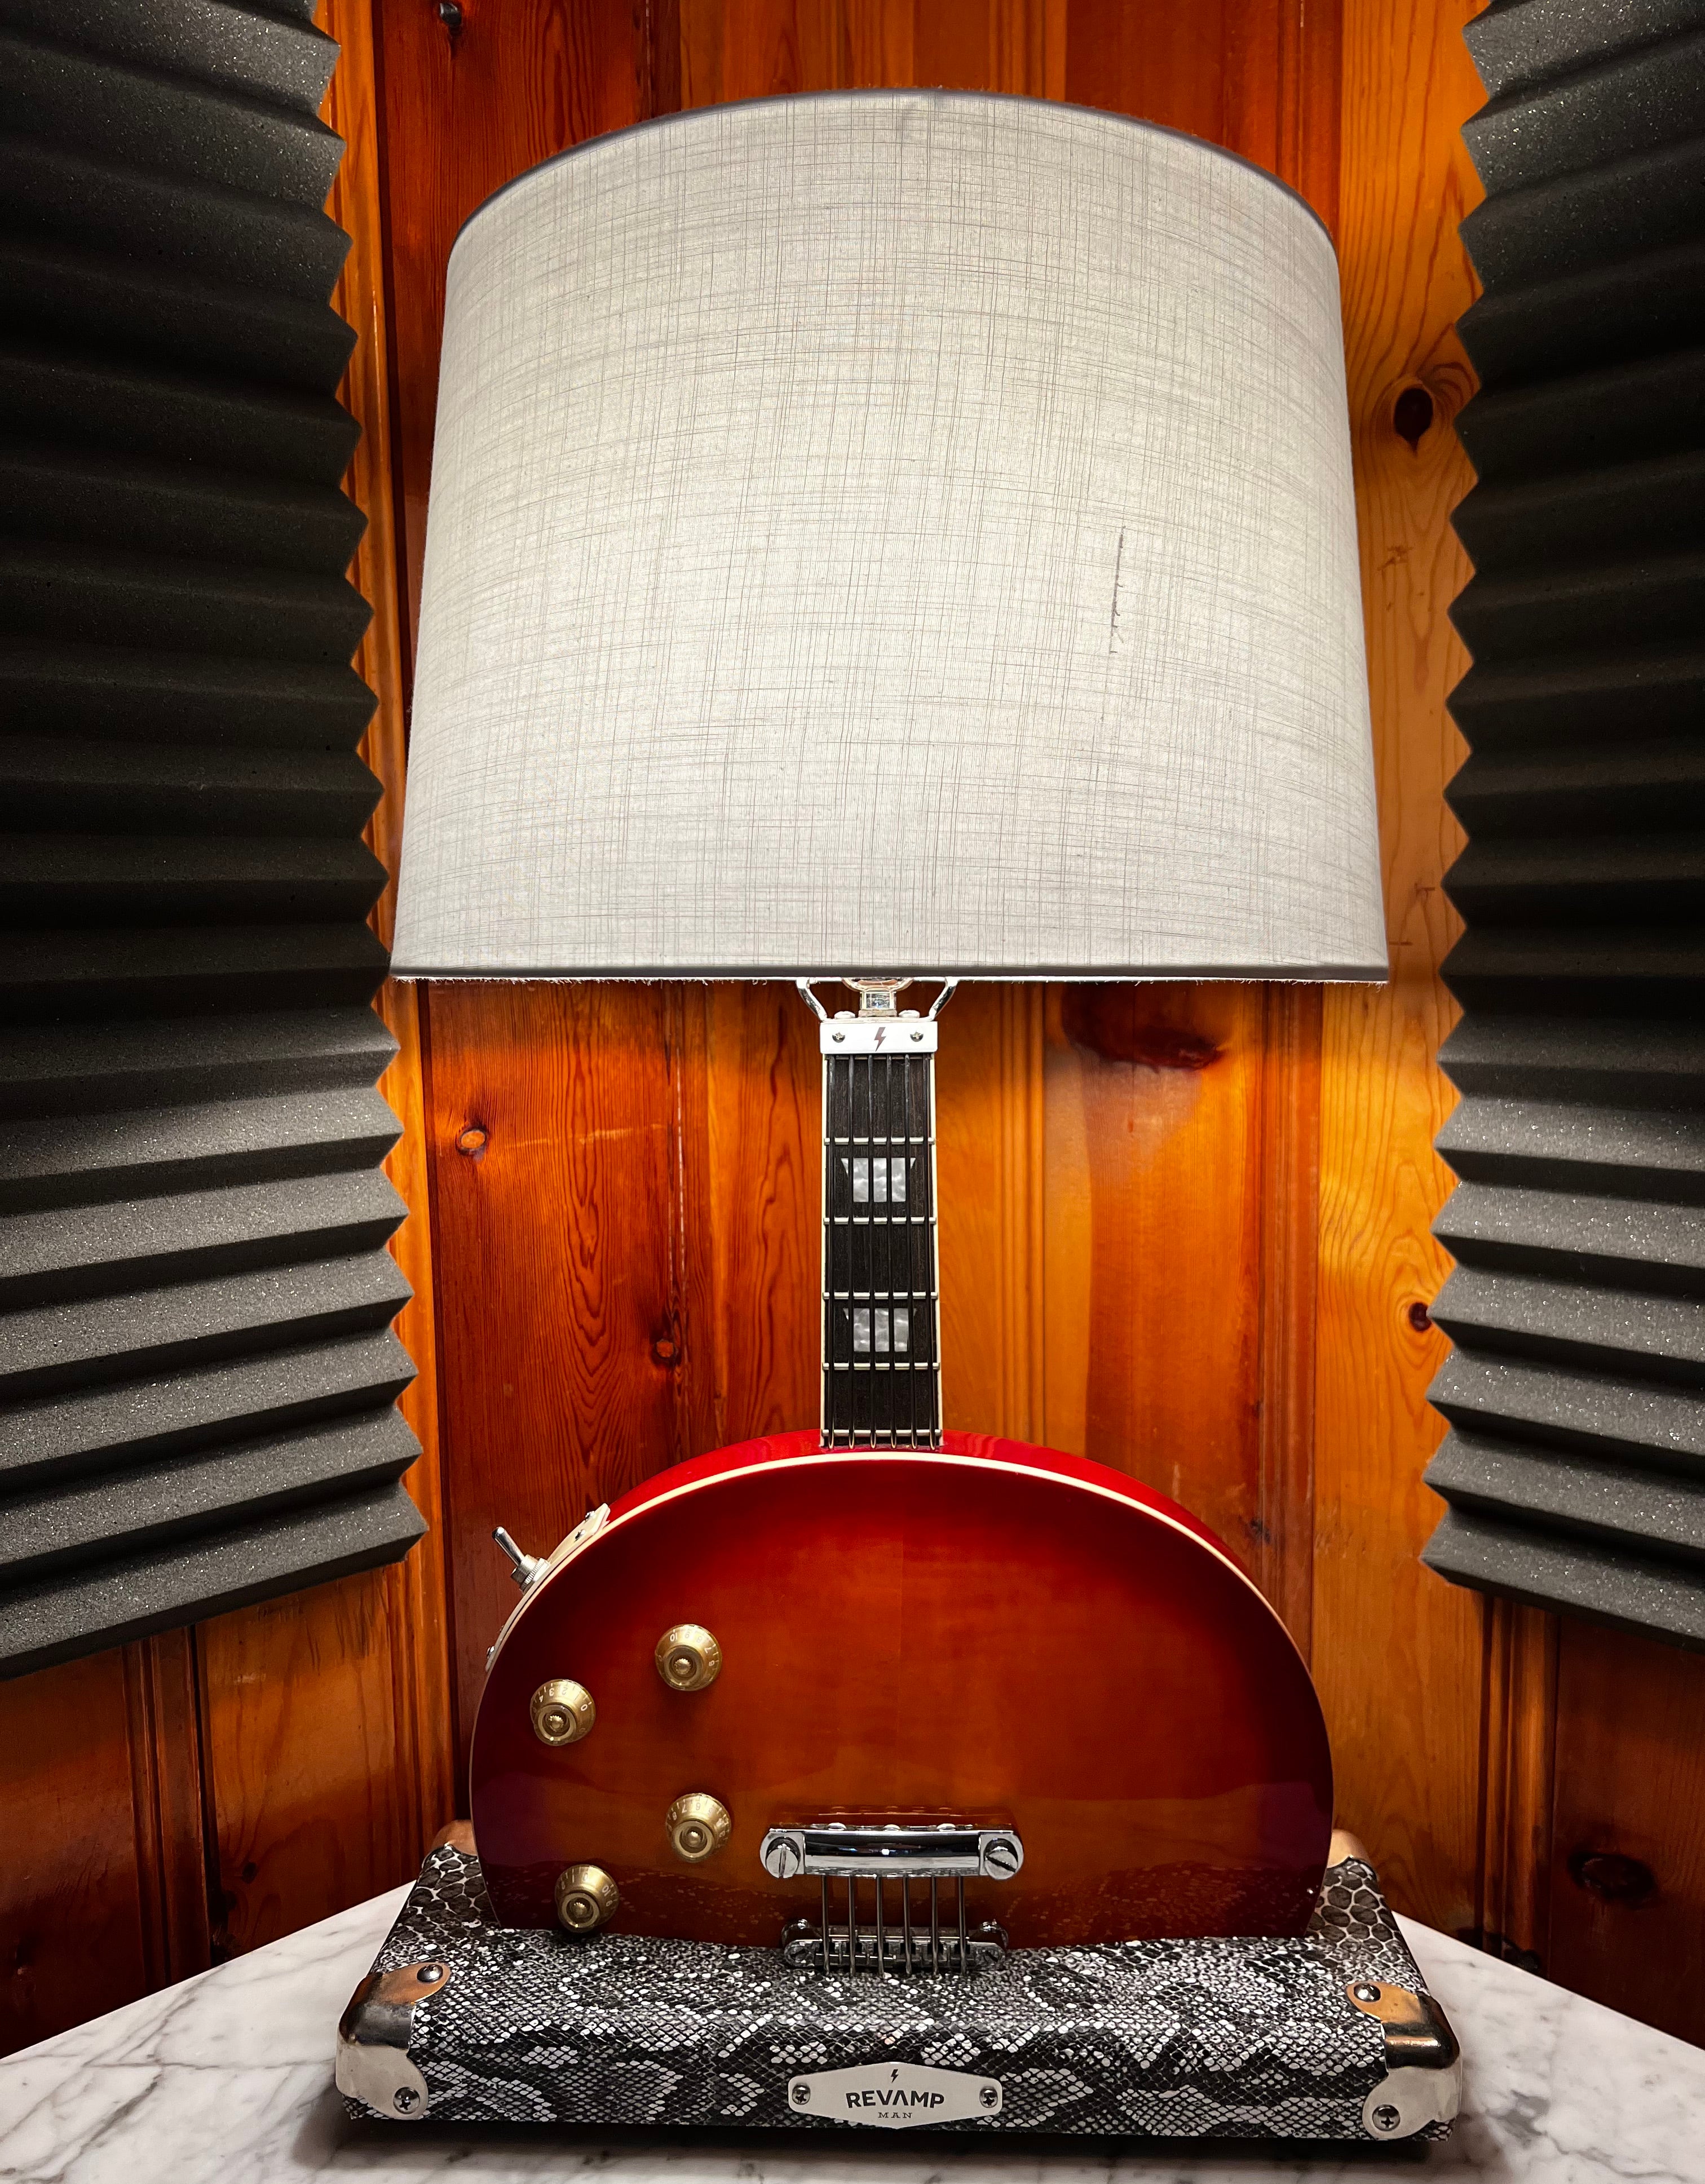 Guitar Lamp -  LP Style Bottoms Up #O39 of Collection